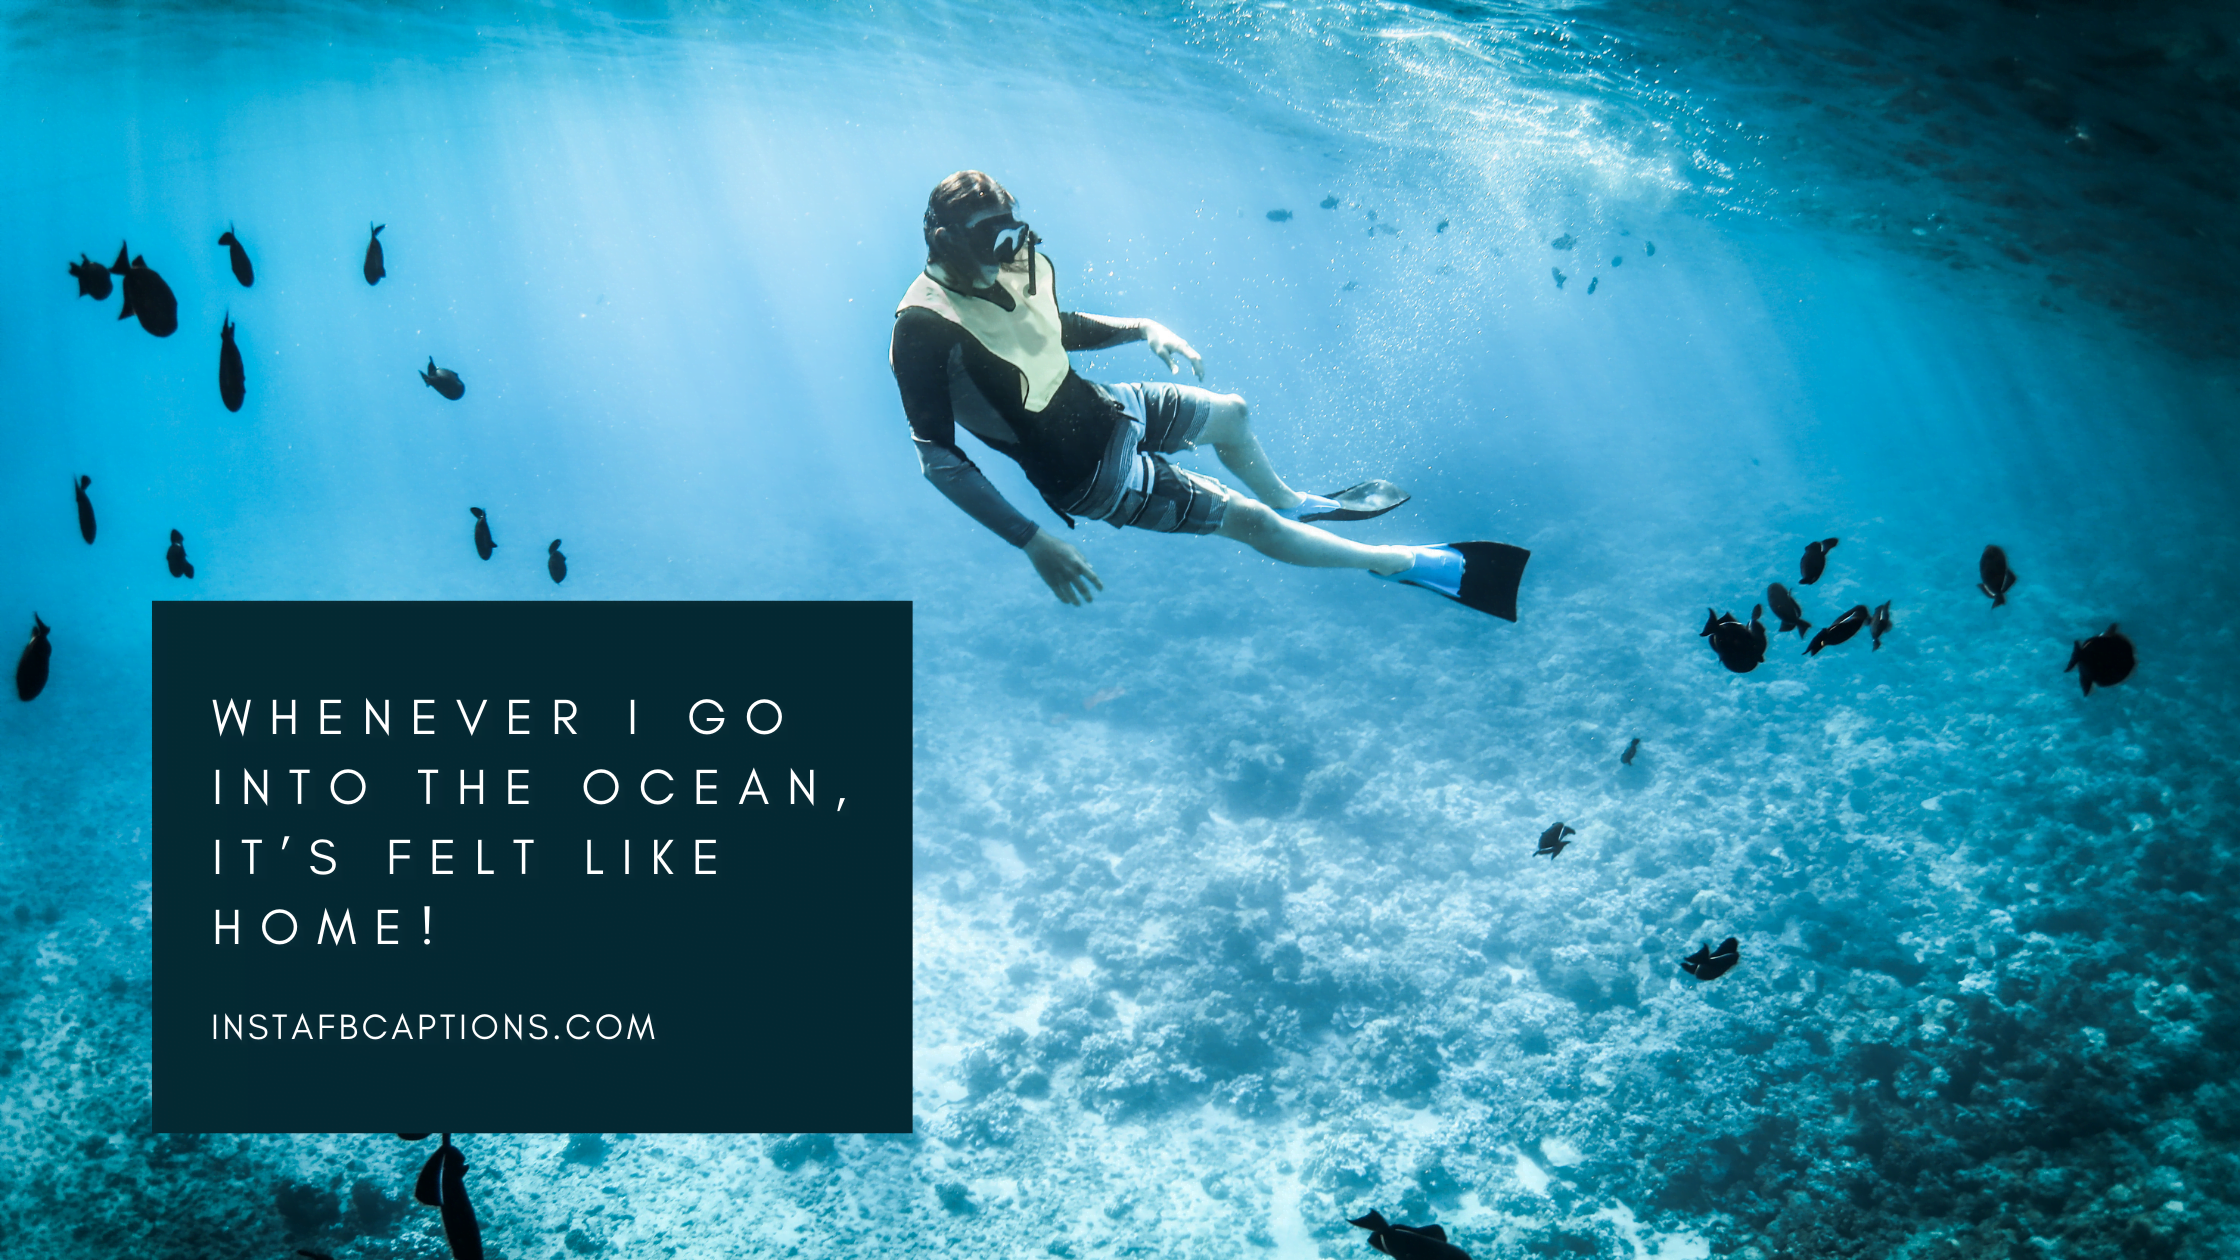 Whenever I go into the ocean, it’s felt like HOME!  - Key West Diving Captions  - 98 Key West Quotes, Captions, Puns, Phrases for 2022